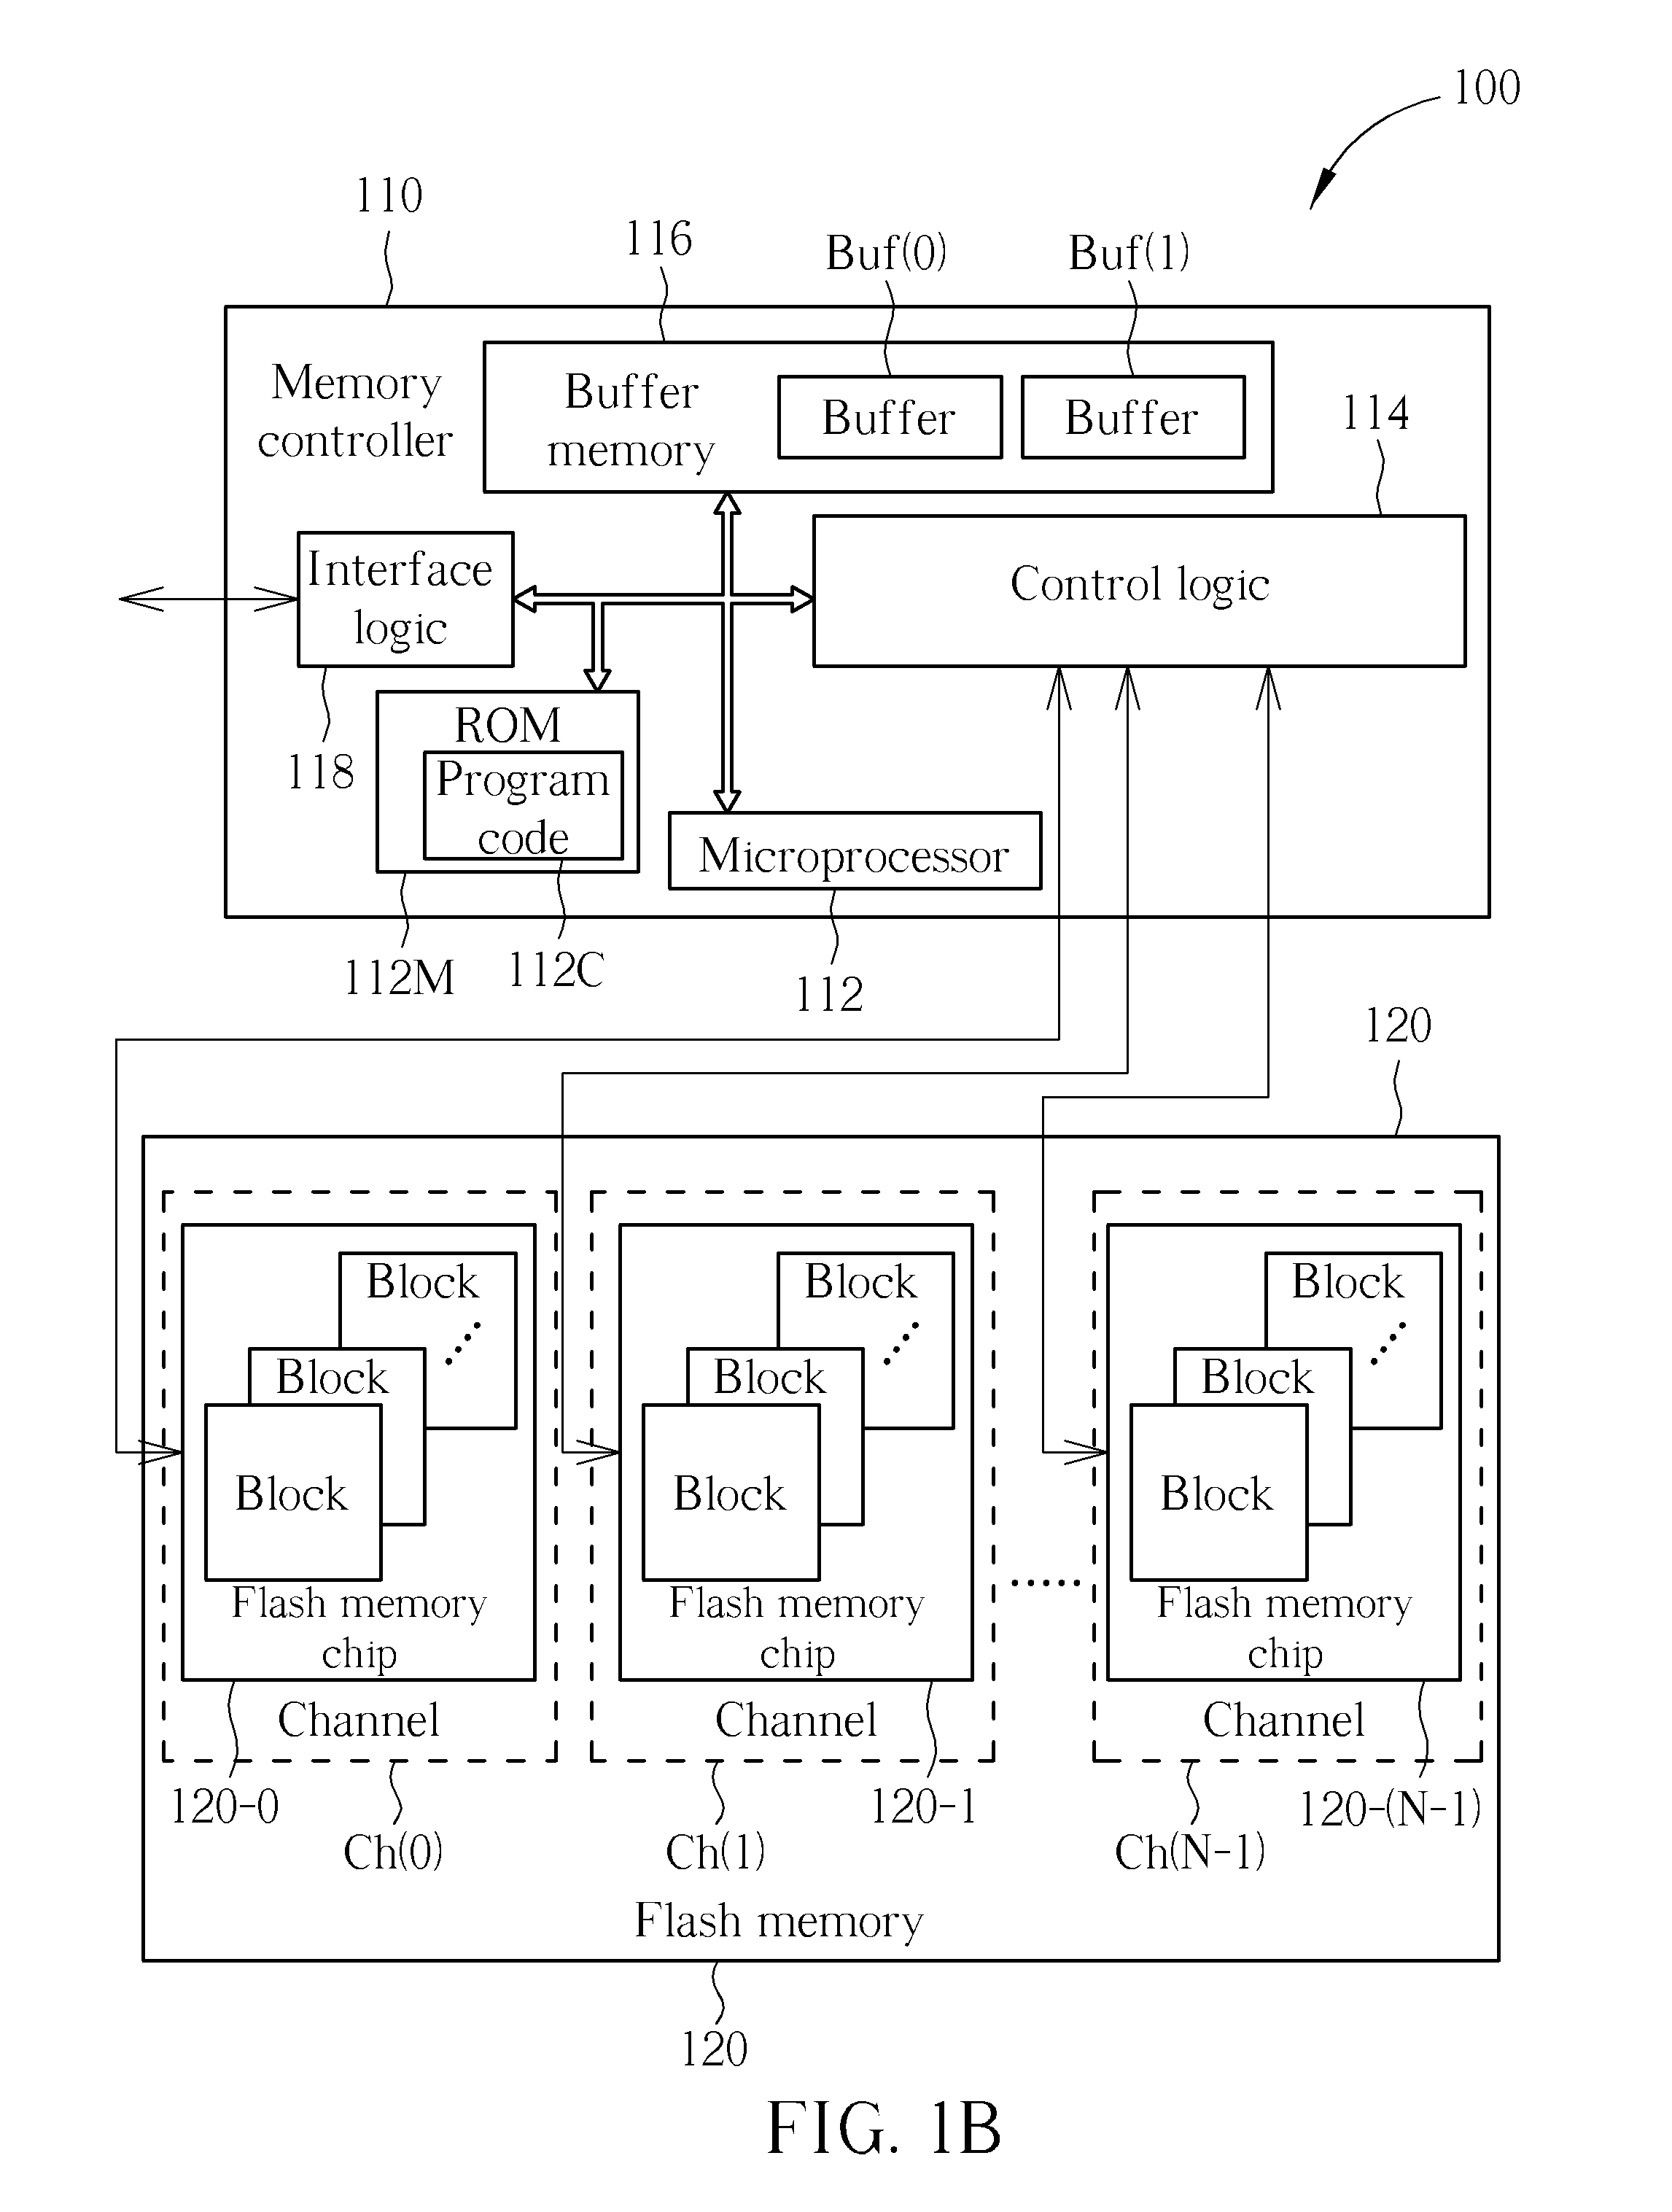 Method for performing block management, and associated memory device and controller thereof